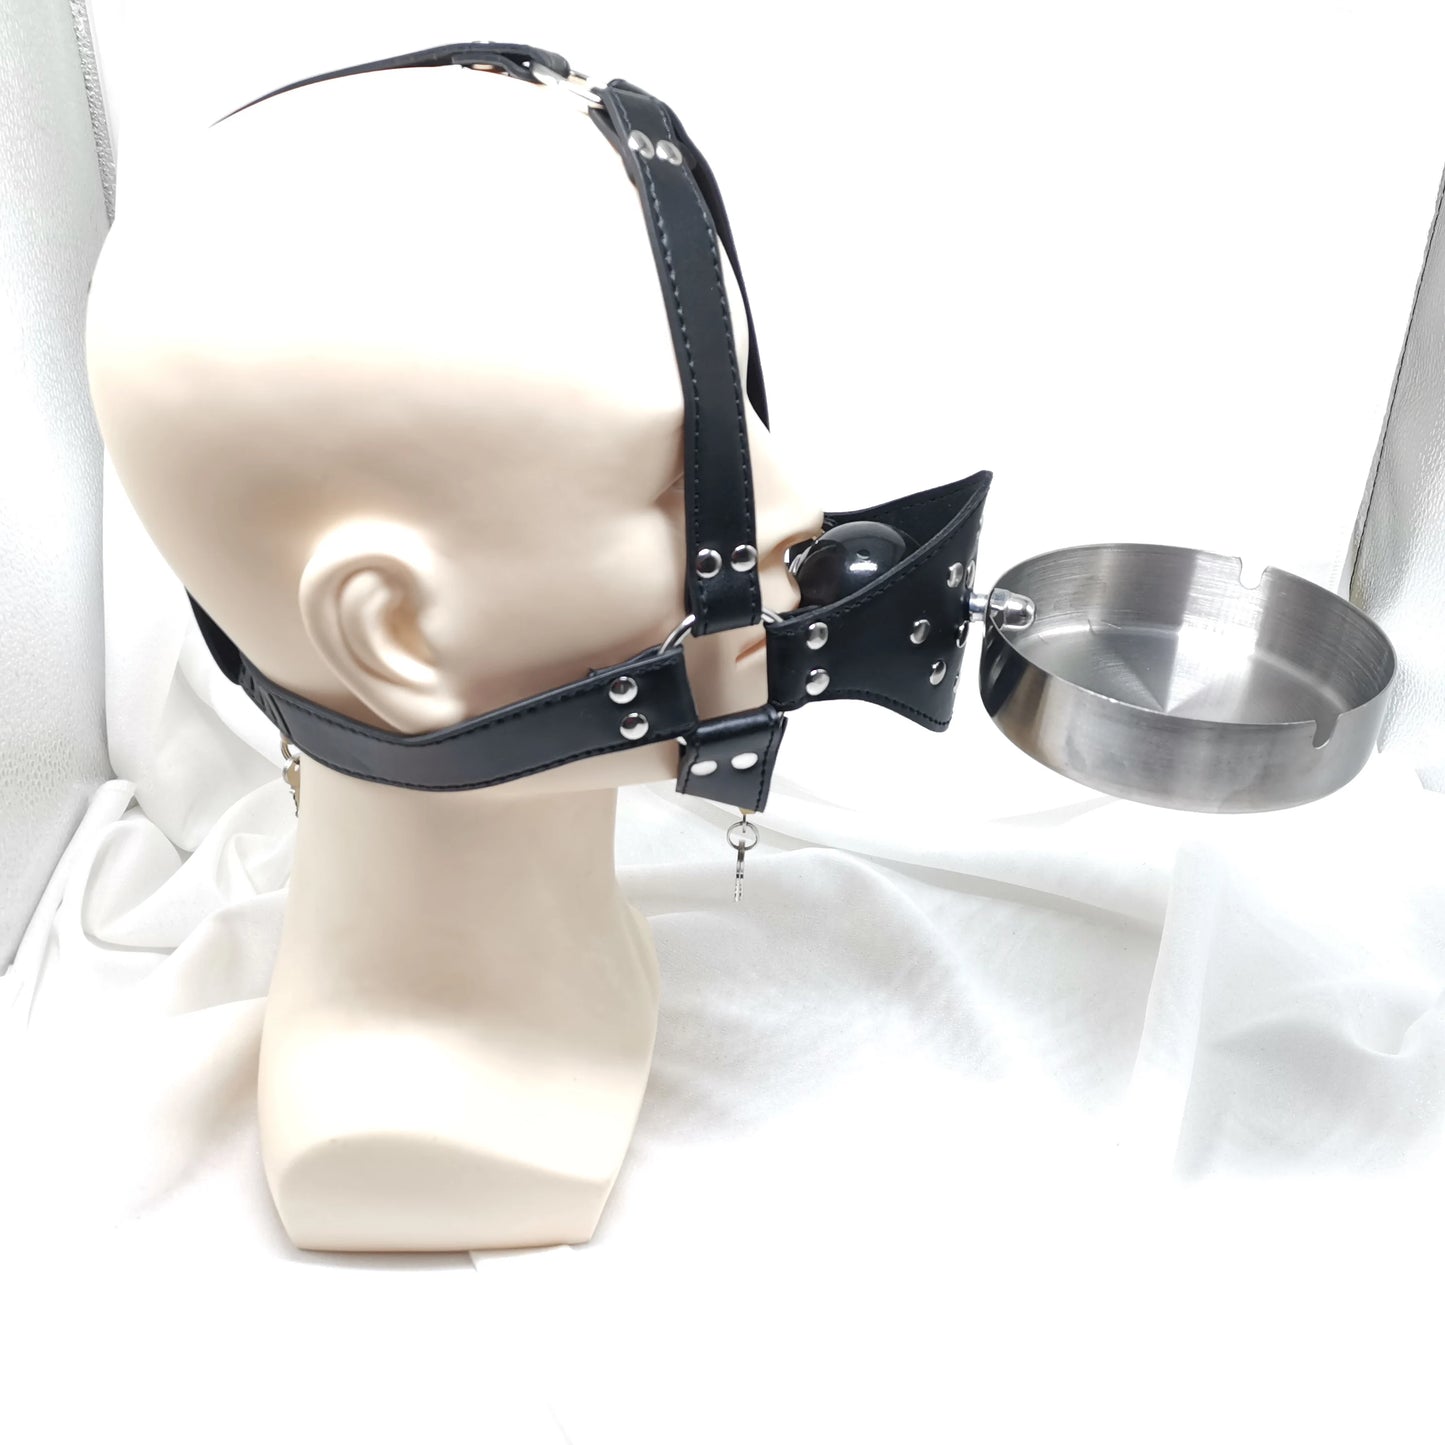 Ashtray + Asphyxia Gag  Belted Face Mask & Head Harness